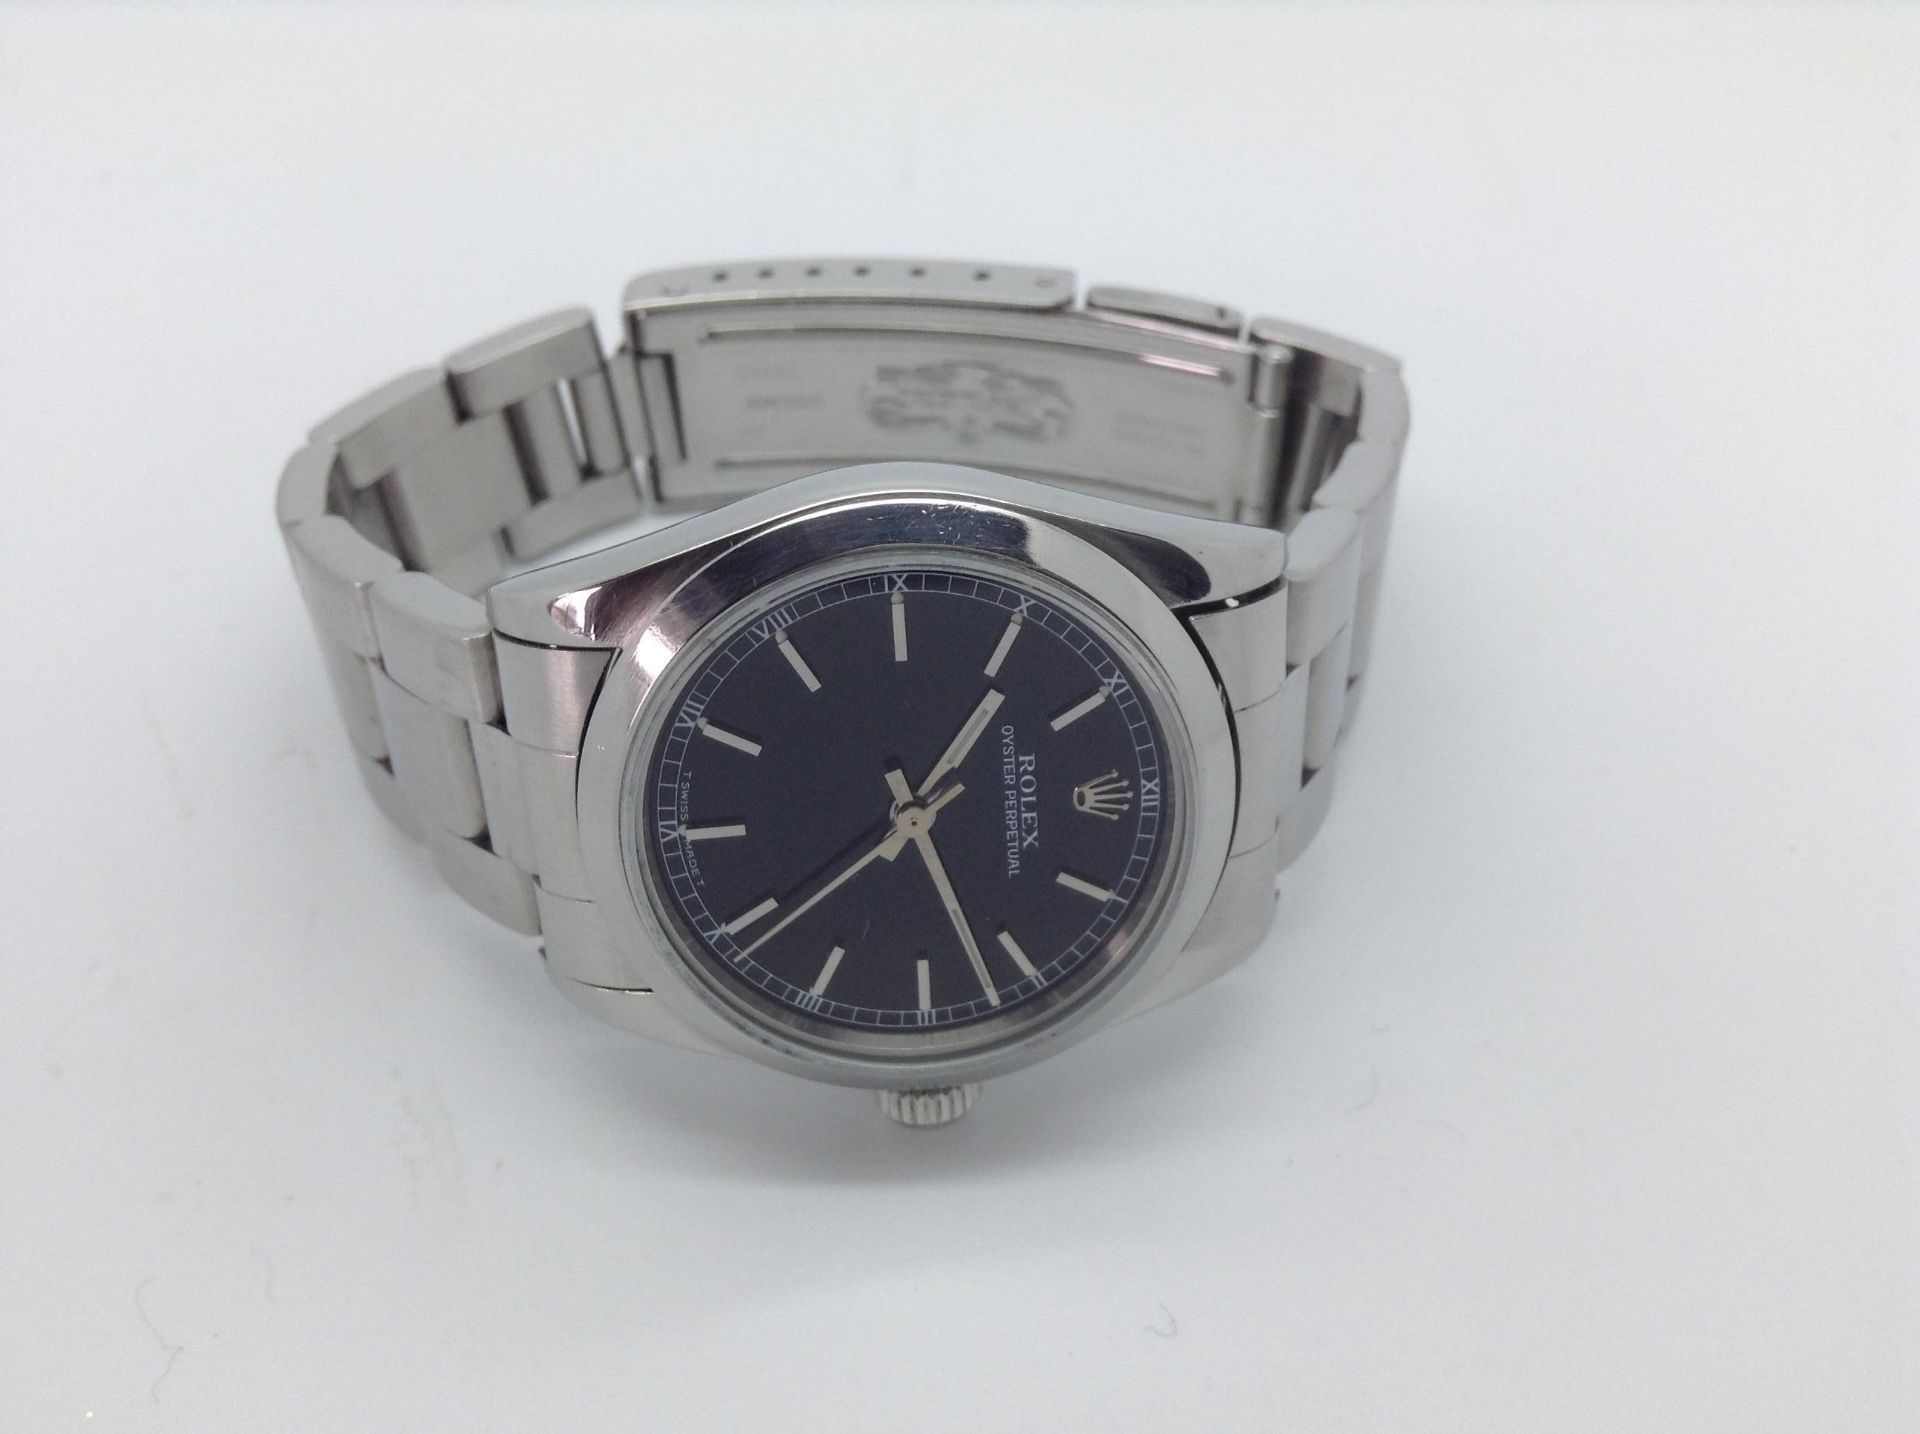 1987 RARE ROLEX MID SIZE UNISEX OYSTER PERPETUAL IN STAINLESS STEEL WITH BLACK DIAL - Image 2 of 5